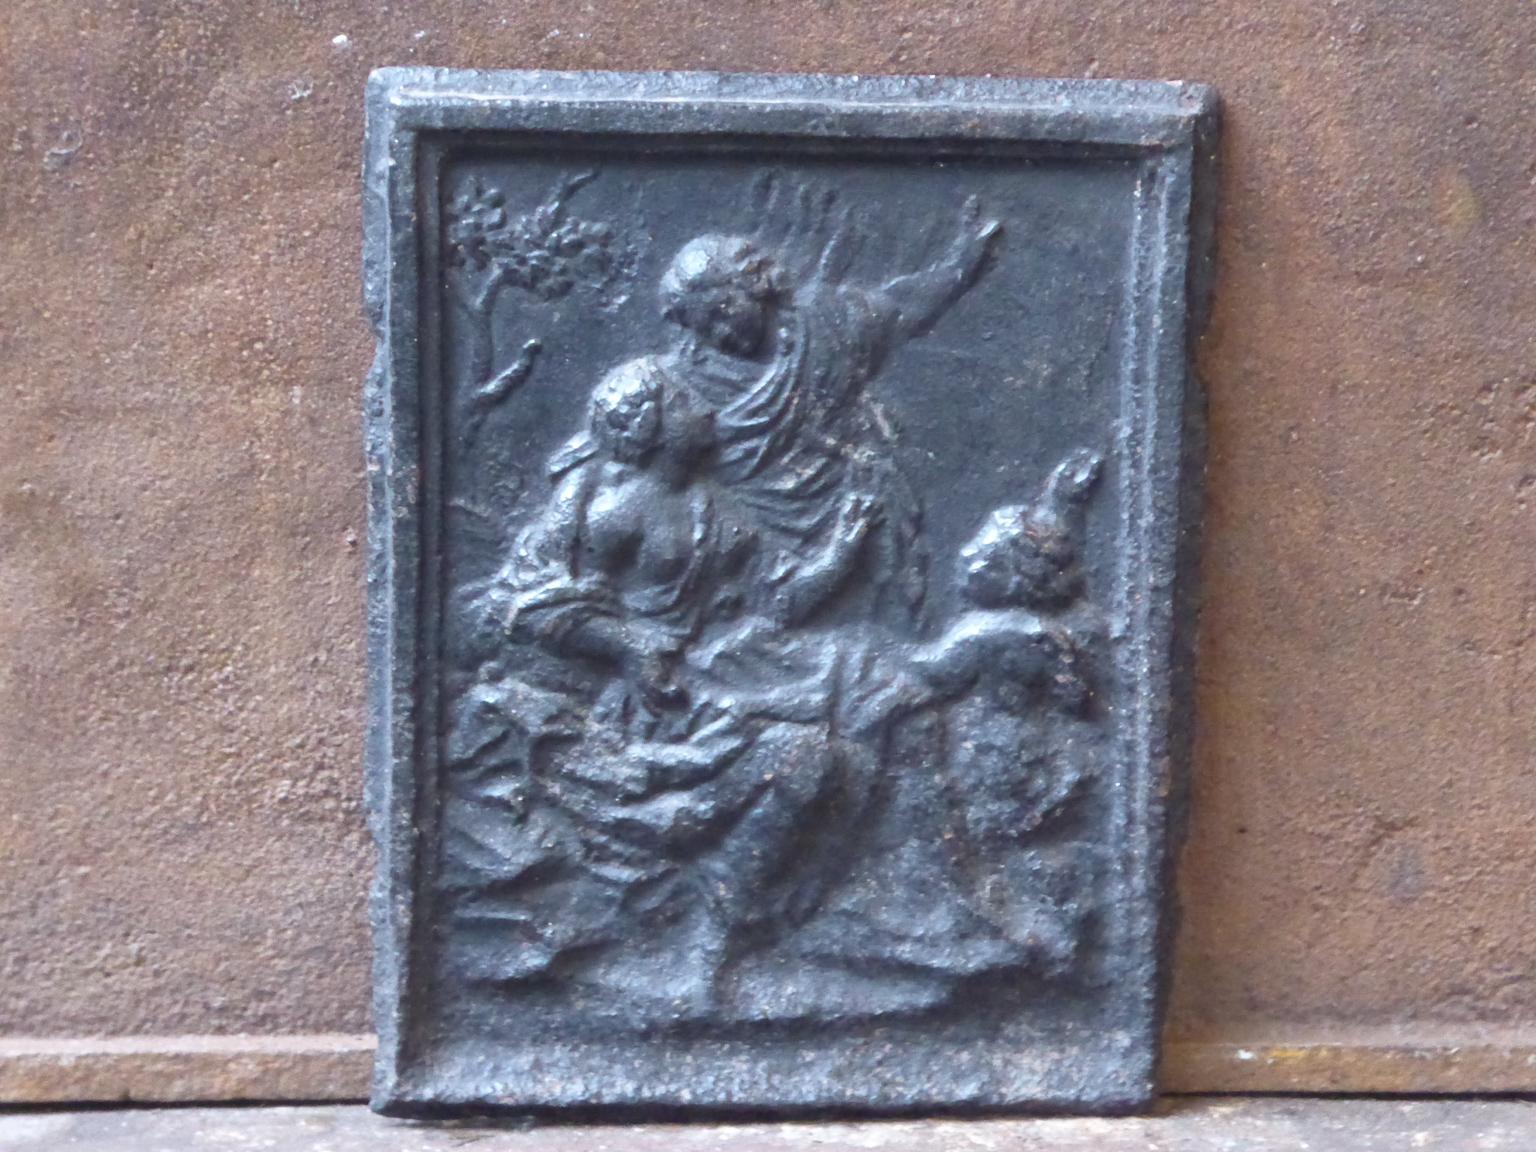 18th-19th century French neoclassical fireback with a rural scene. The fireback is made of cast iron. The patina is black / pewter.